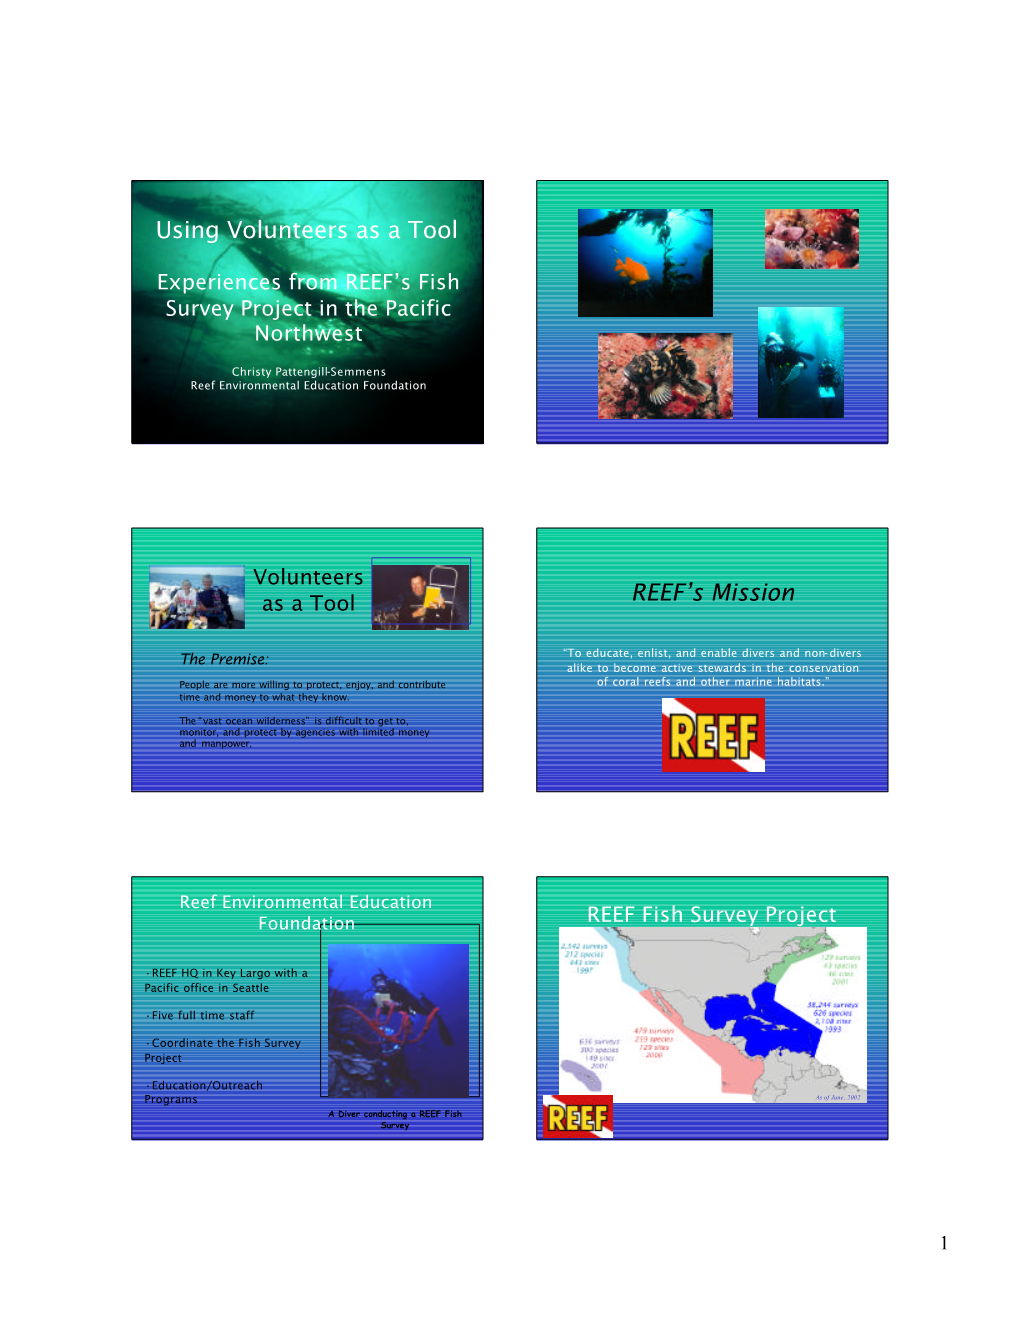 Slides: the REEF Fish Survey Project, by Christy Semmens